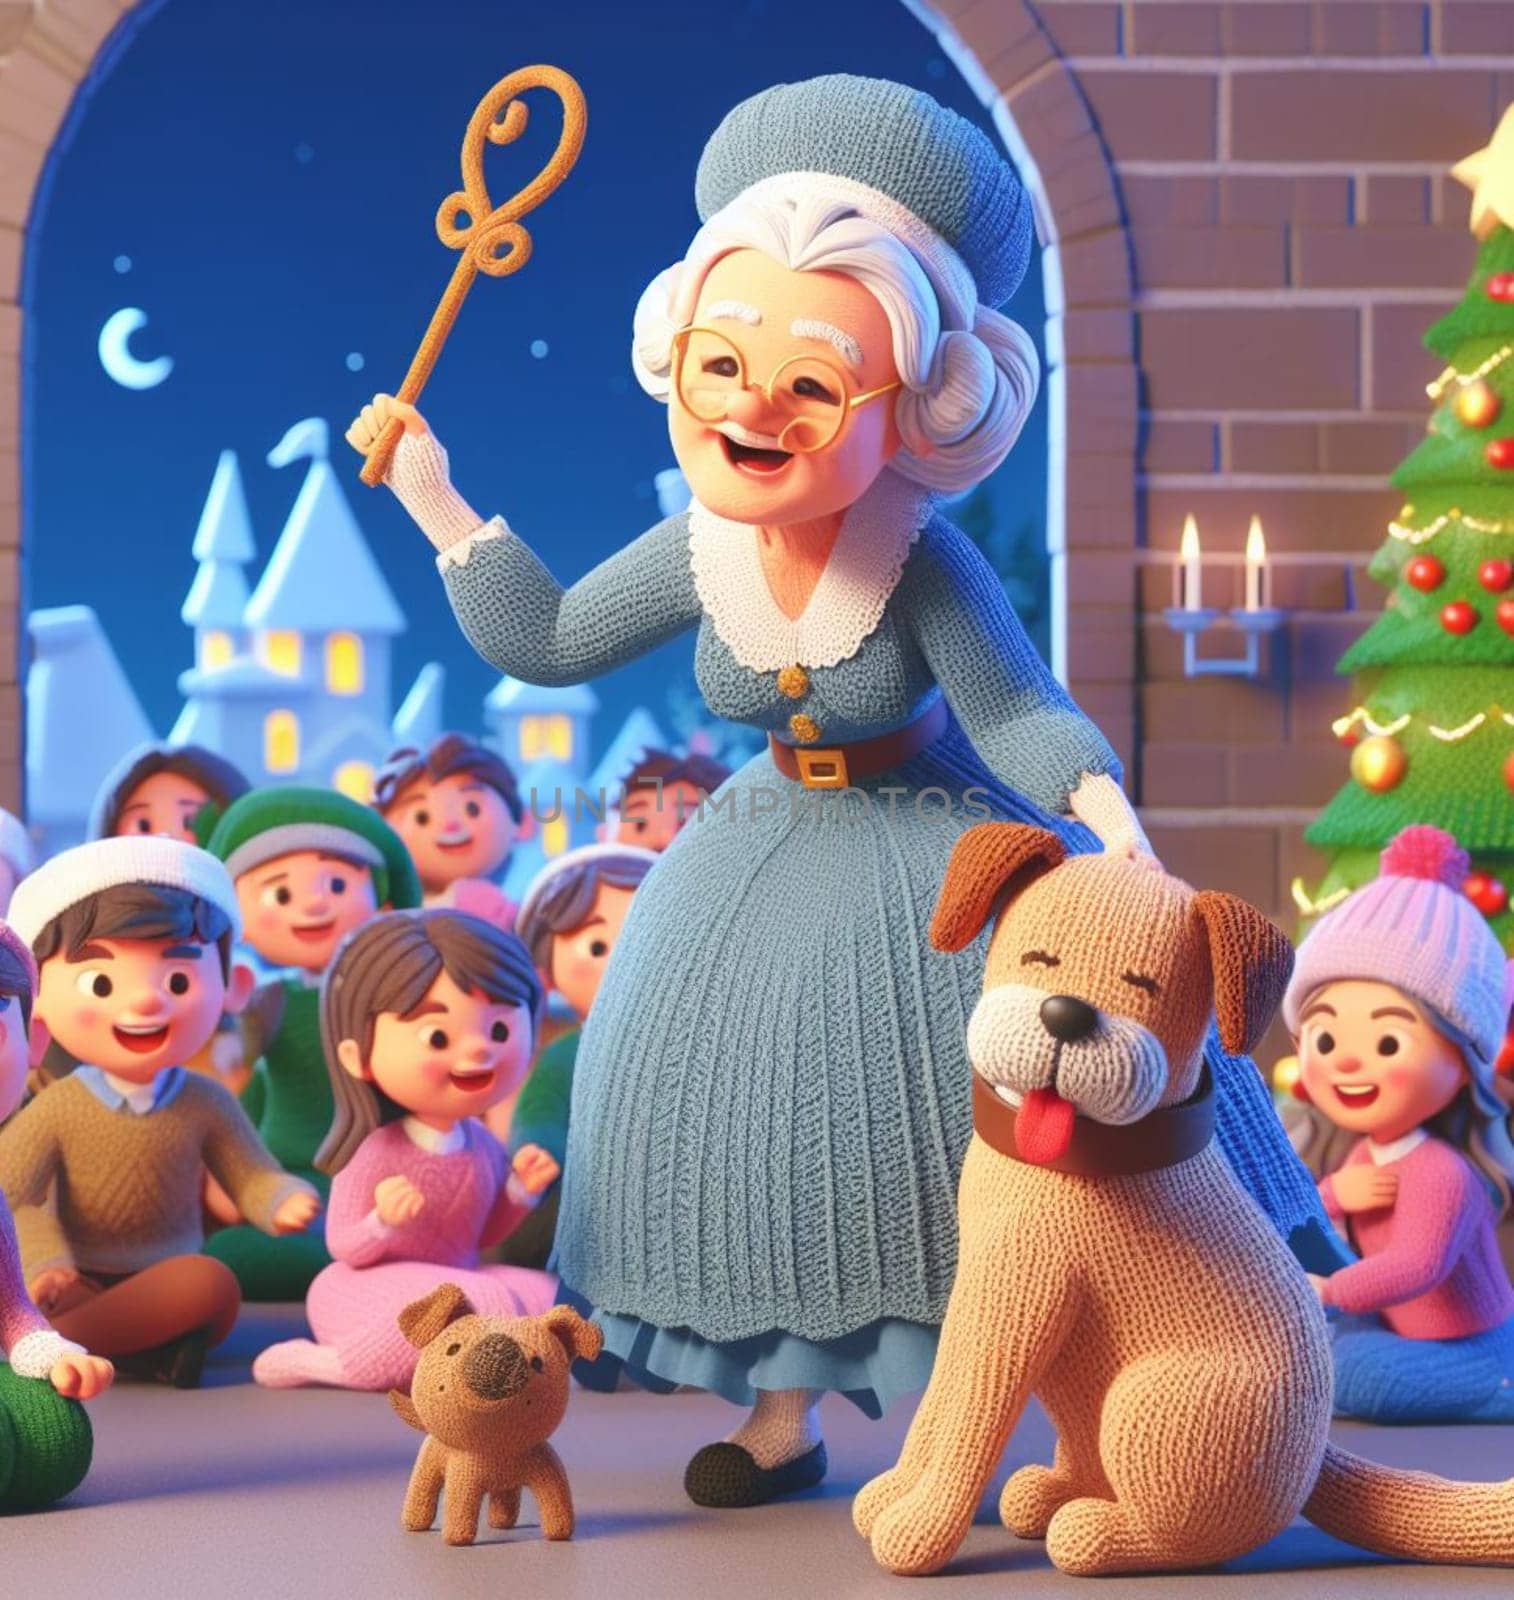 granny wear santa claus costume telling christmas fairy tales to children near a castle illustration 3d render ai art generated